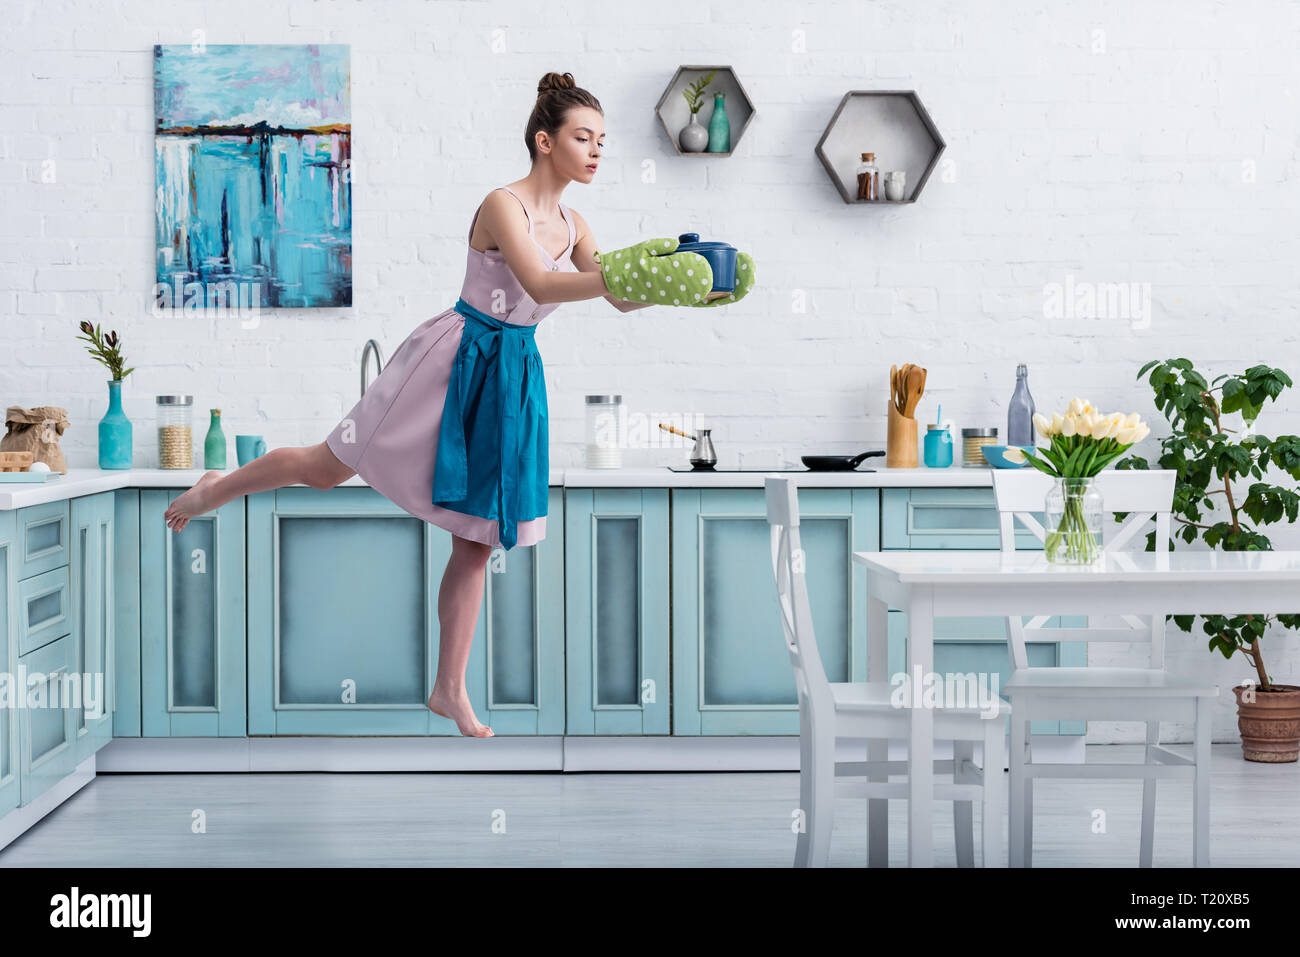 beautiful barefoot girl in potholders levitating in air with pot in kitchen Stock Photo